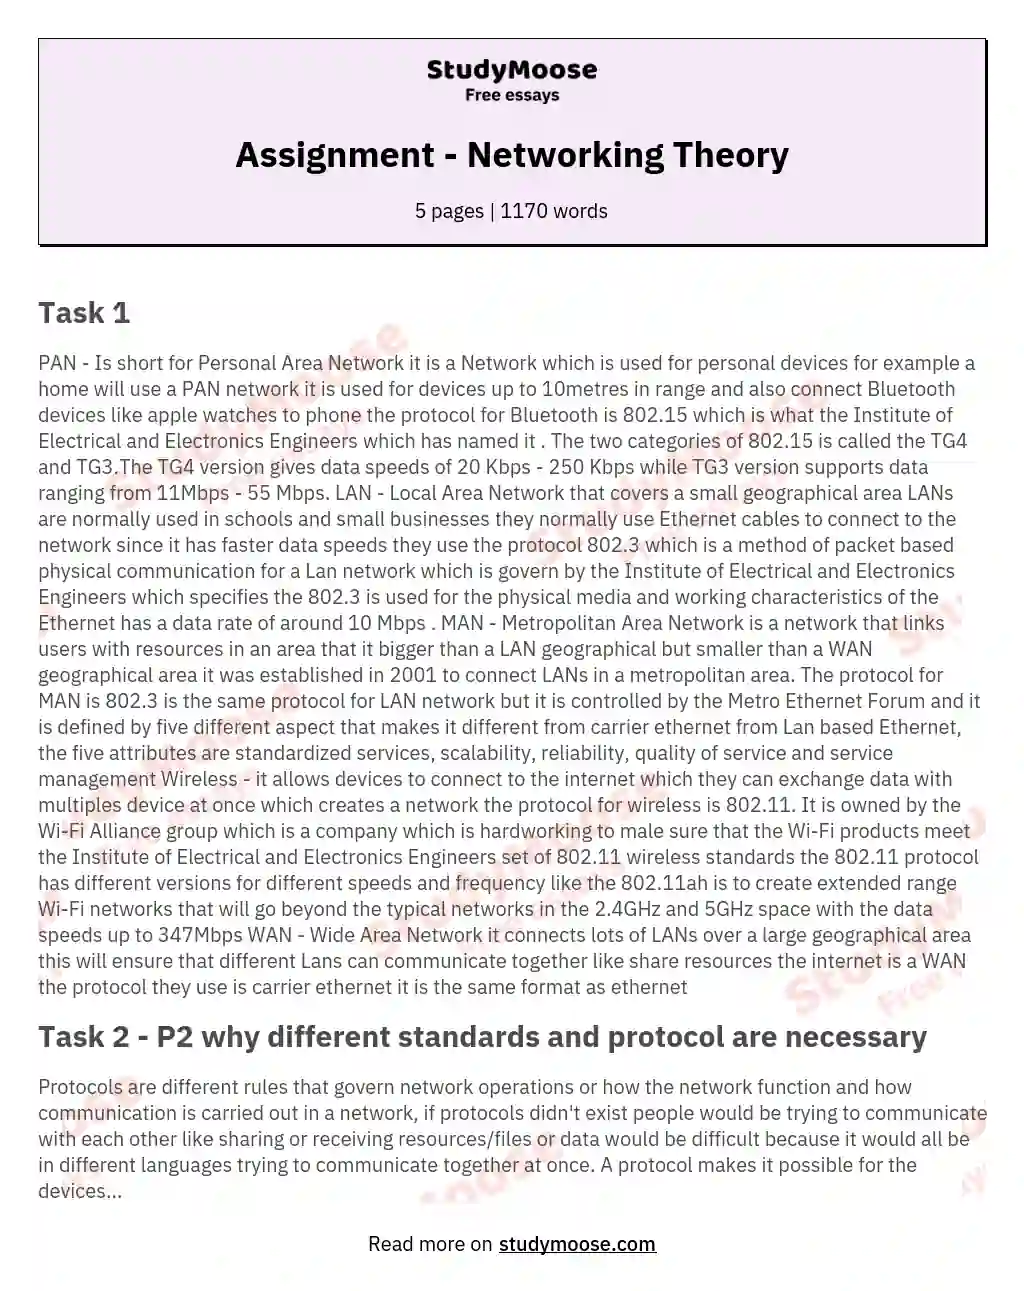 Assignment - Networking Theory essay